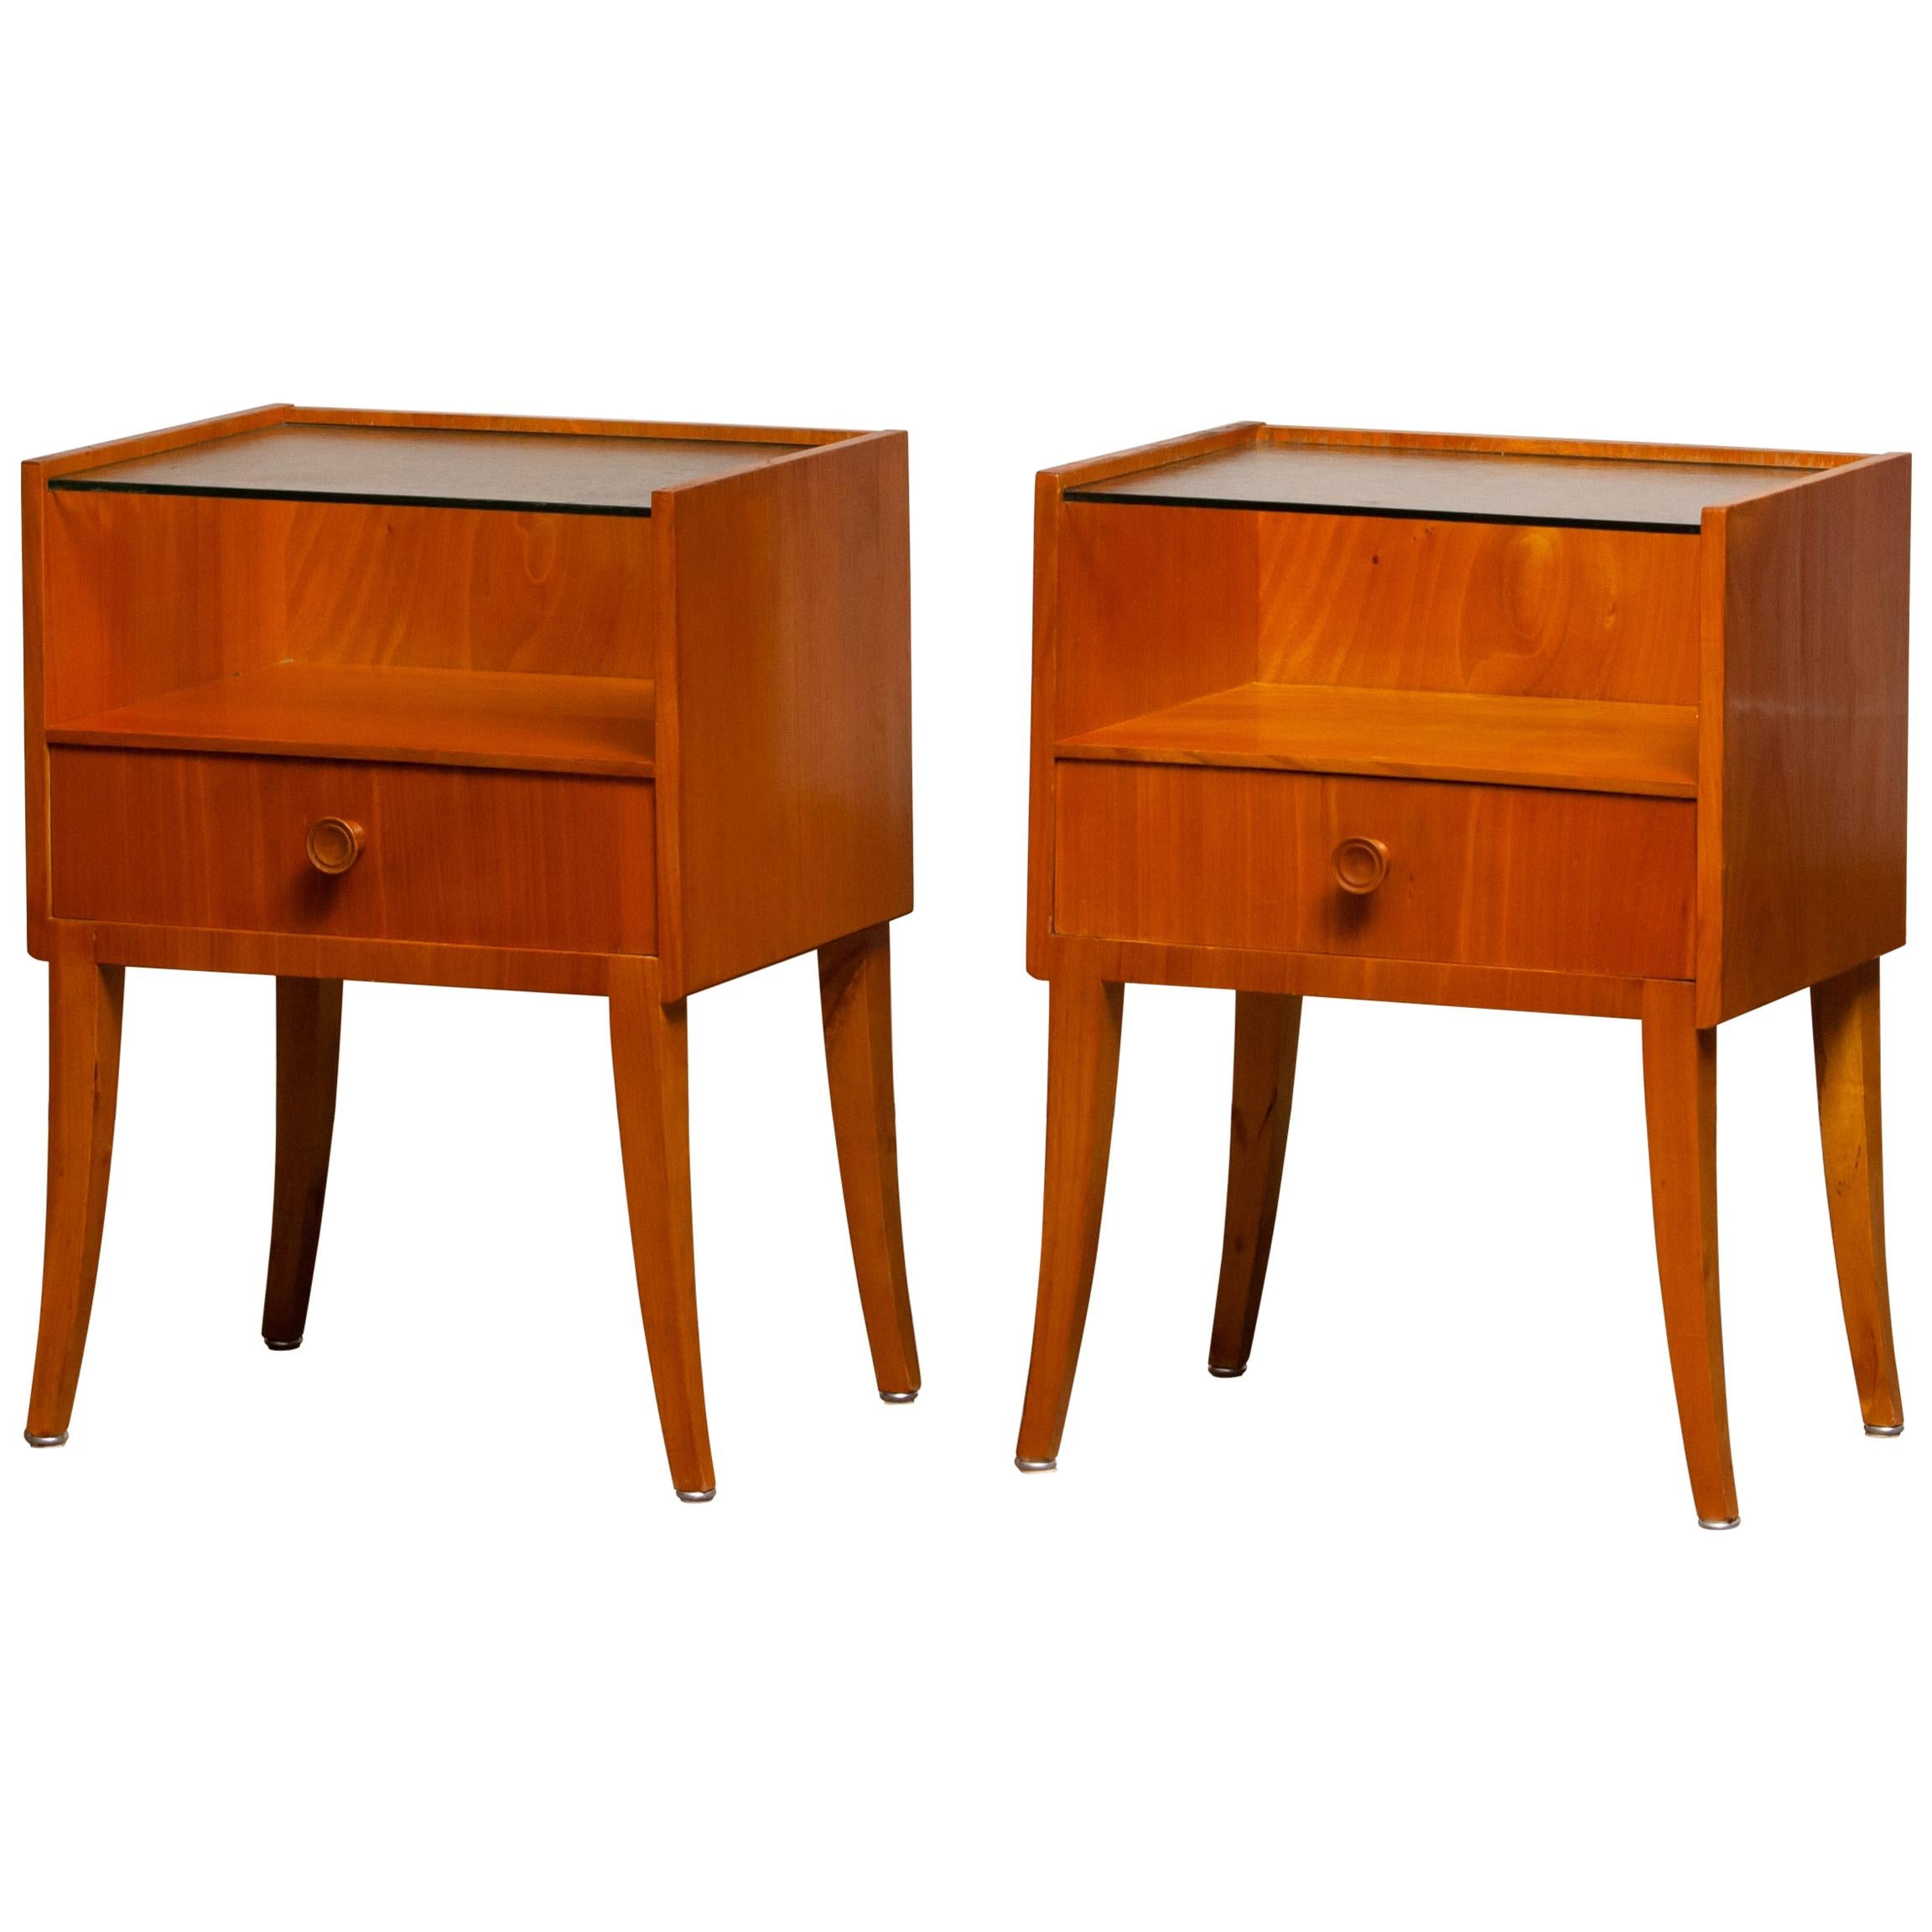 1950s Pair of Nightstands / Bedside Tables from Sweden in Elm with Glass Top